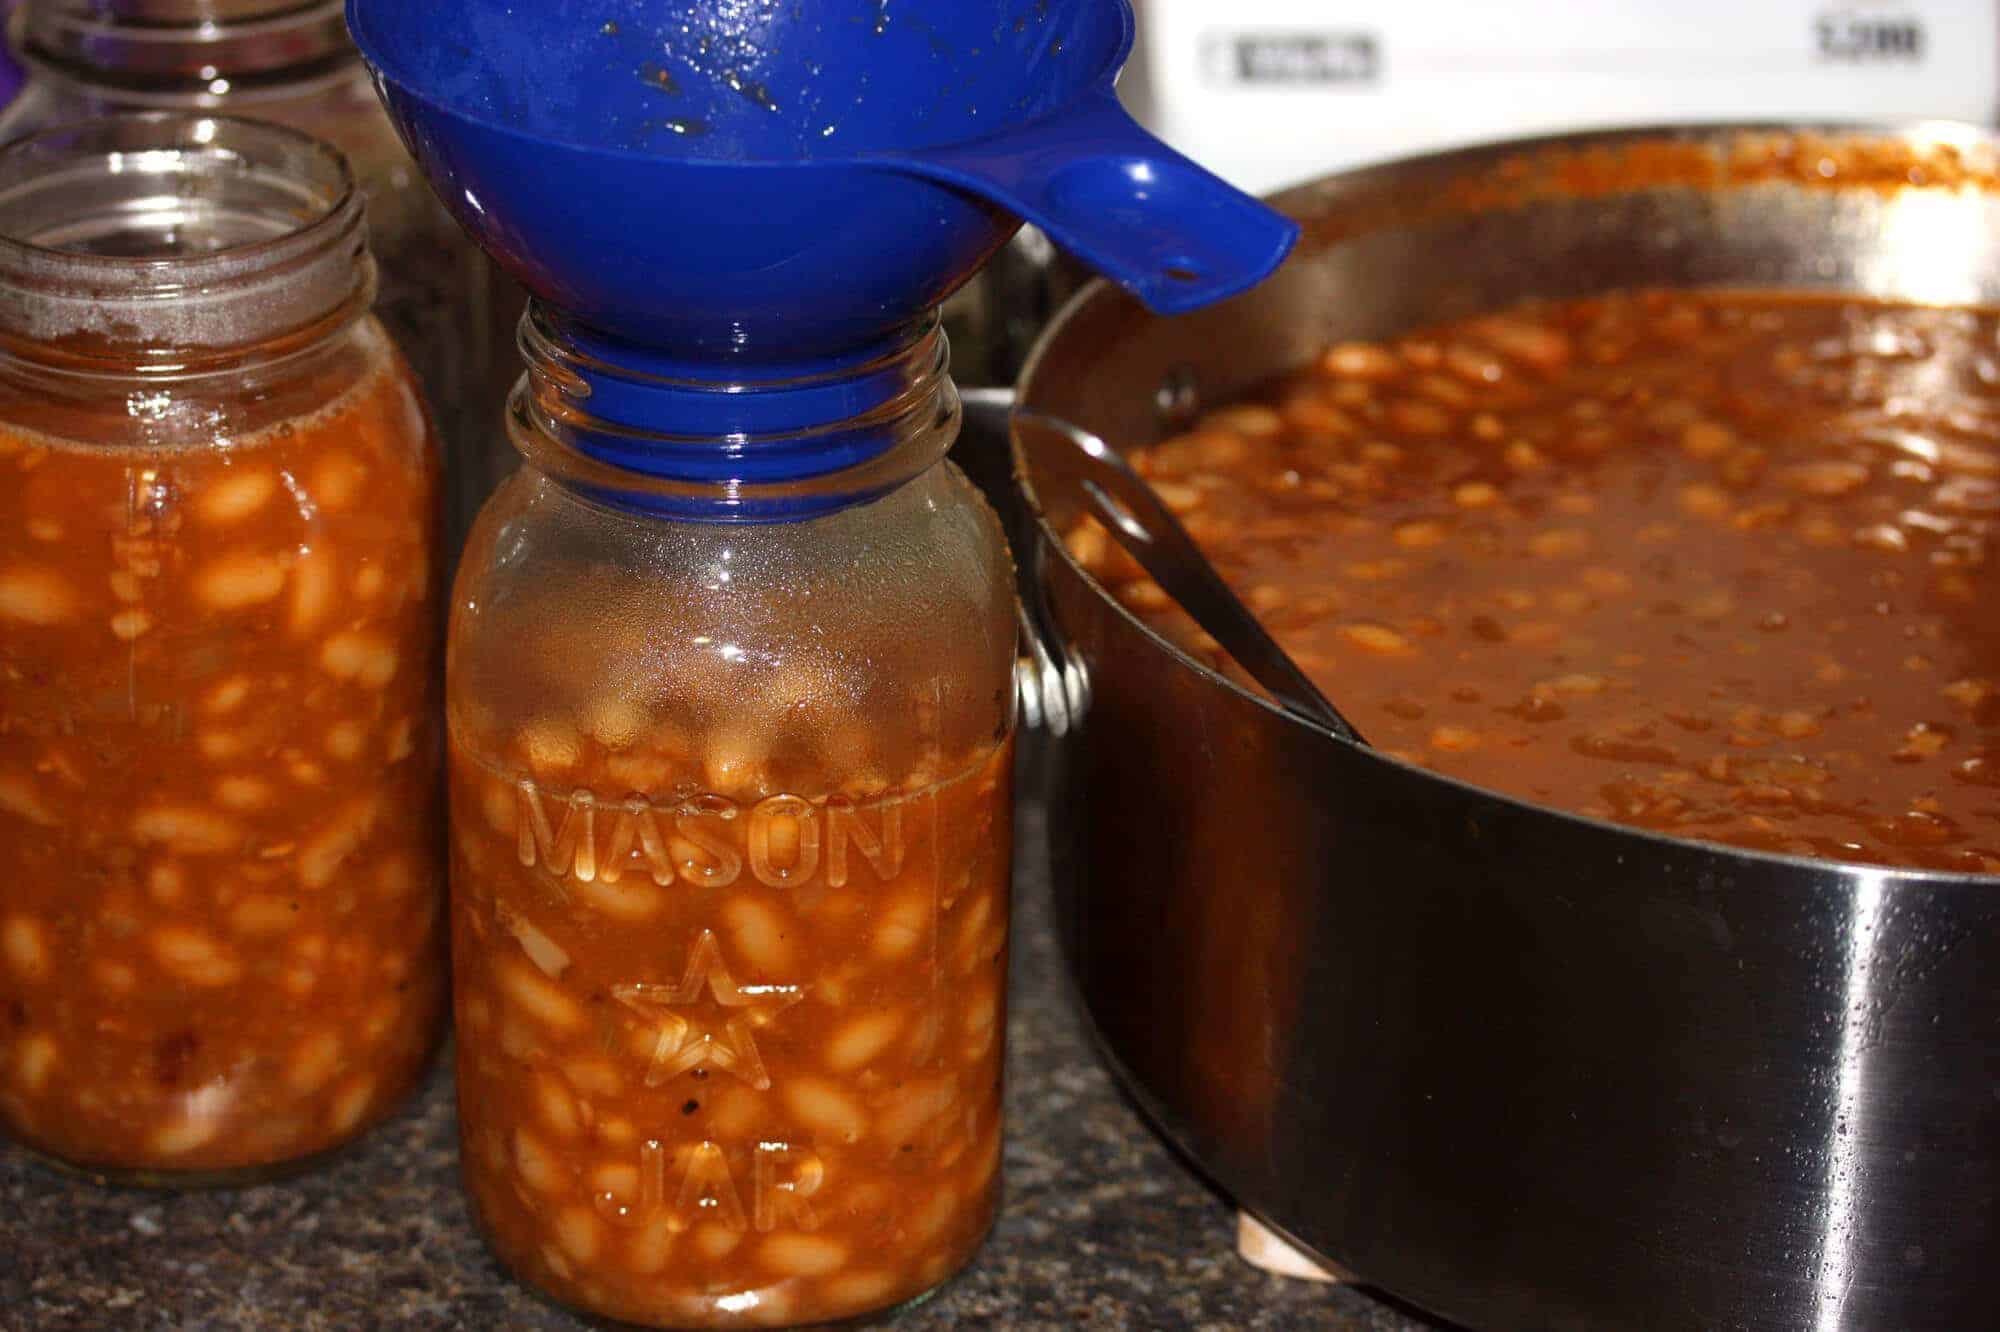 How To Make Homemade Canned Boston Baked Beans or Pork and Beans